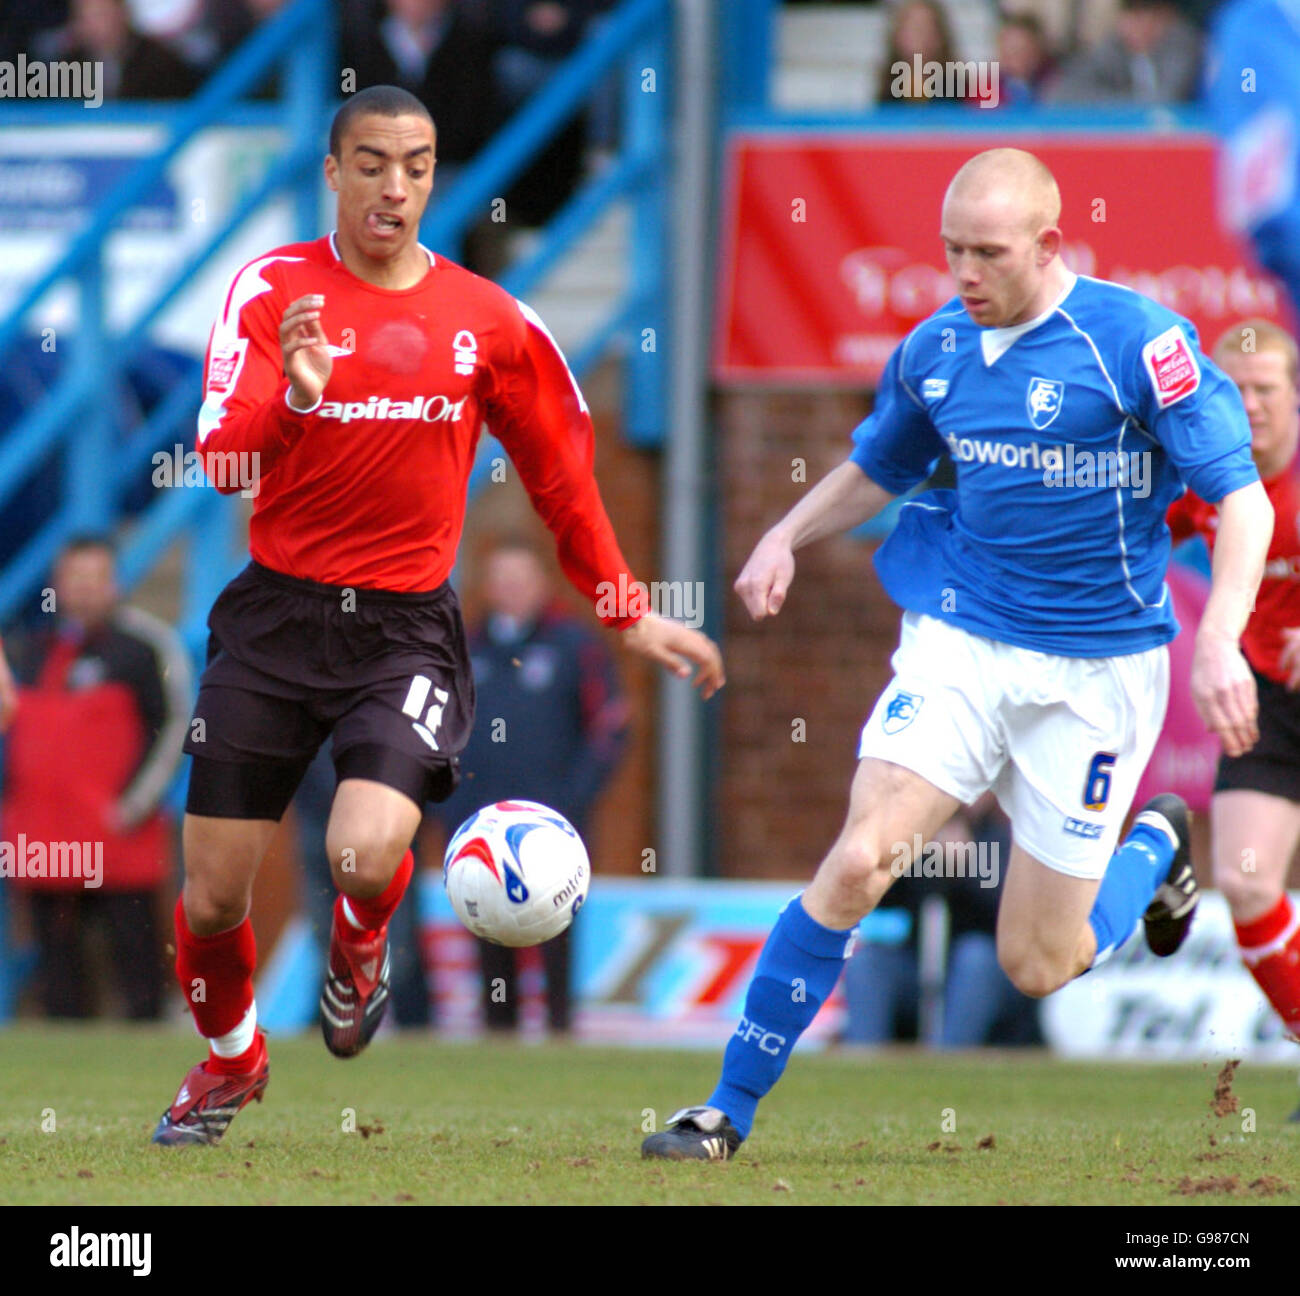 Soccer - Coca-Cola Football League One - Chesterfield v Nottingham Forest - Saltergate Stock Photo